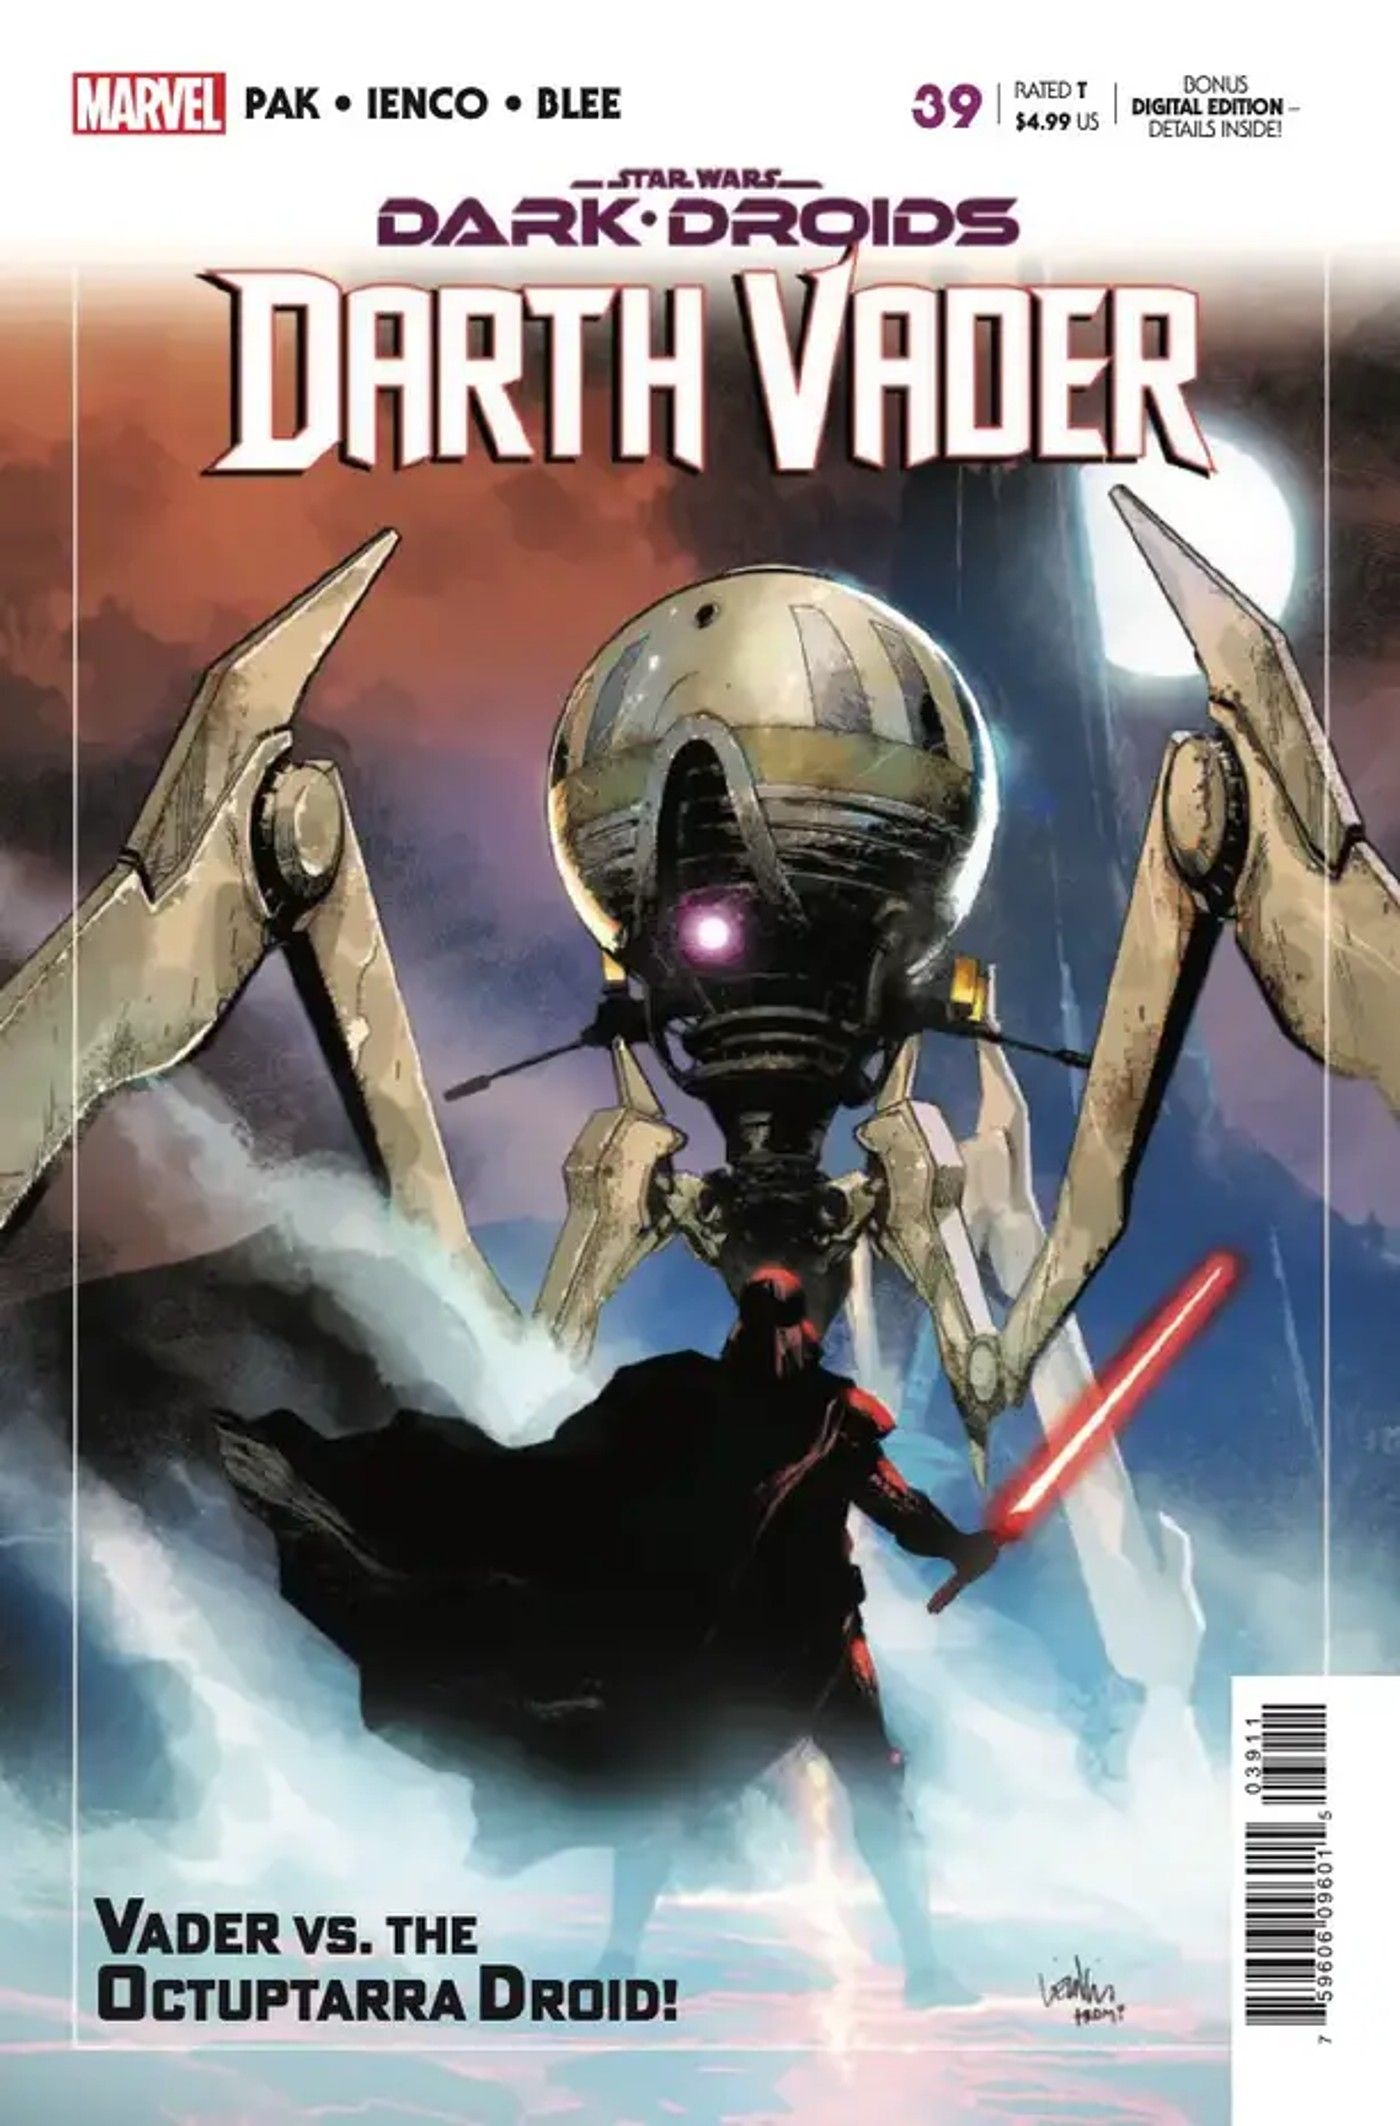 “The Crucible of Hate”: Darth Vader’s Road to Redemption Begins with 1 Question